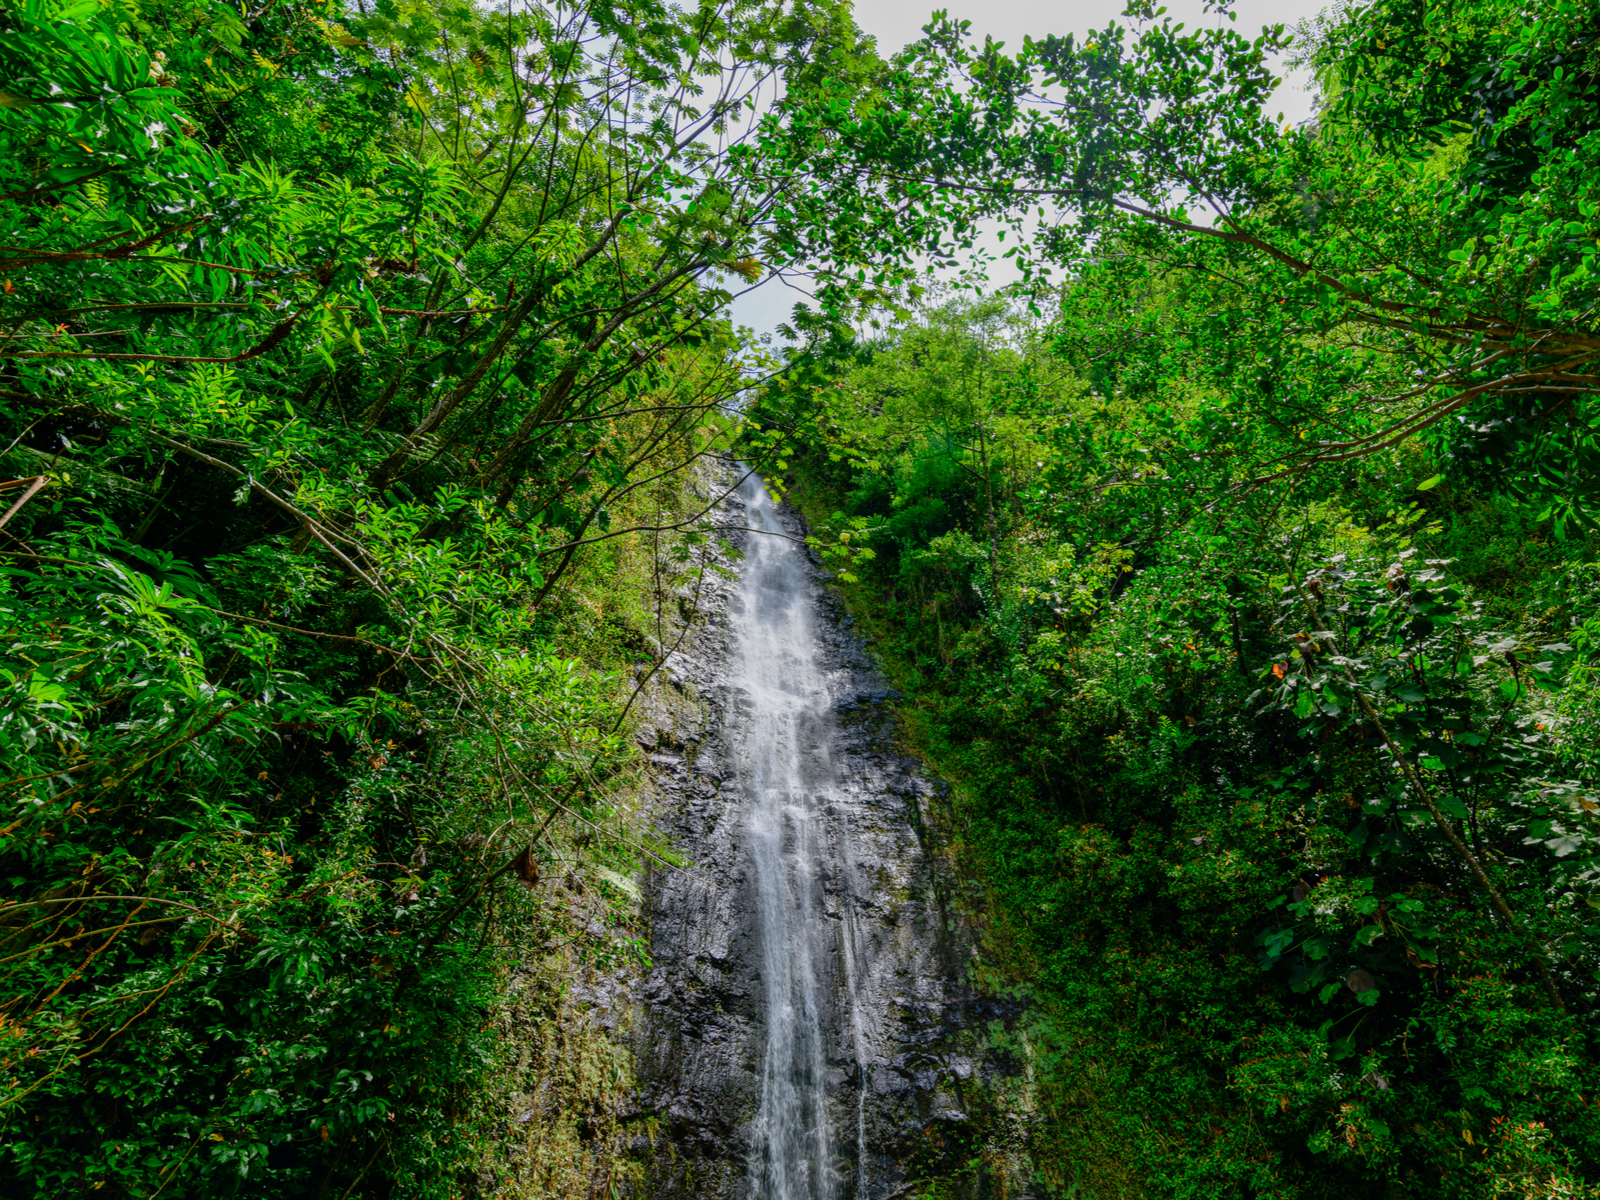 Mānoa Falls, one of the best hikes in Hawaii, as viewed from the ground